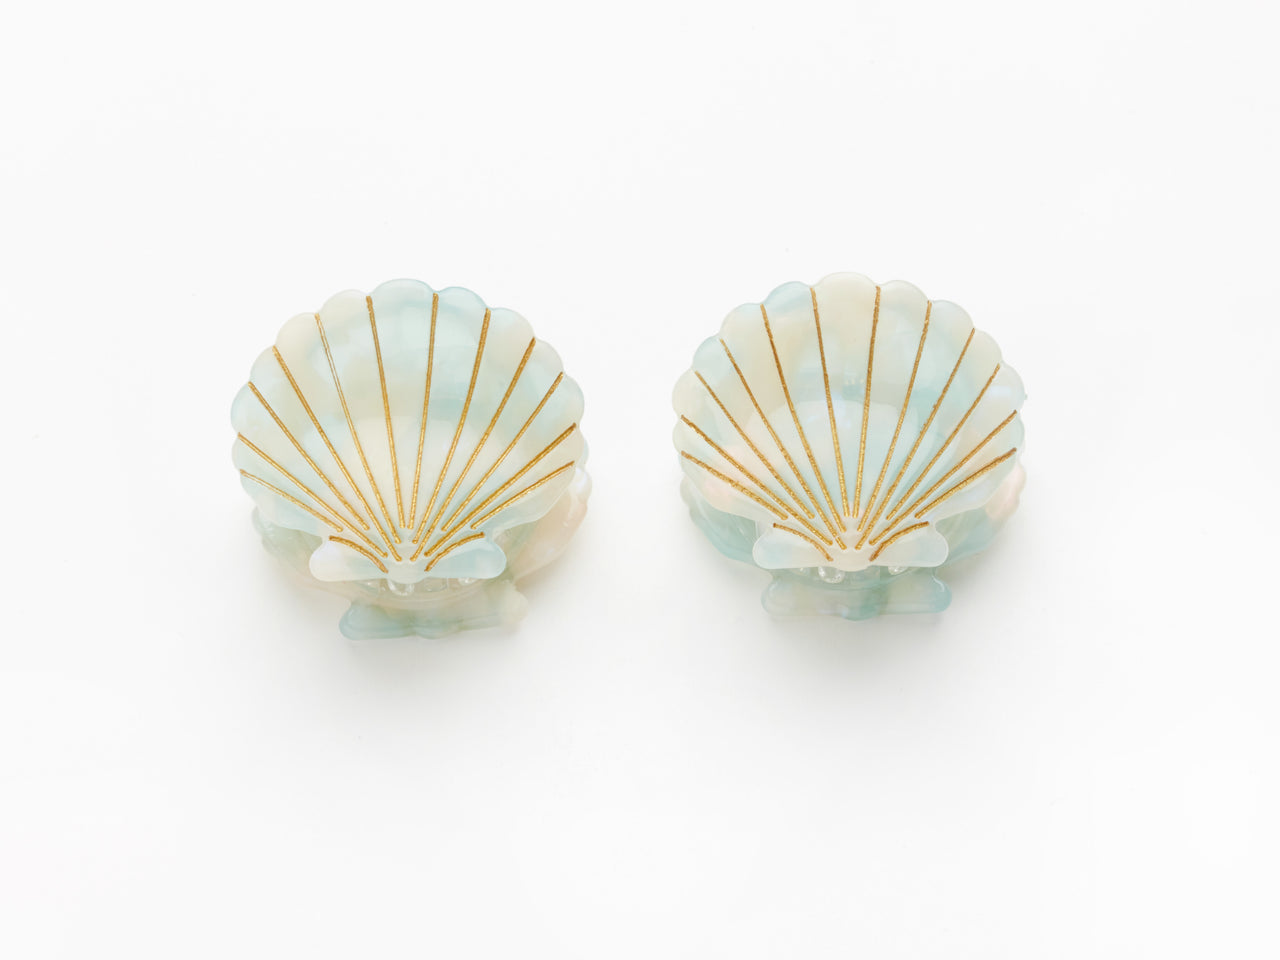 Ursula Shell Clips in Mint